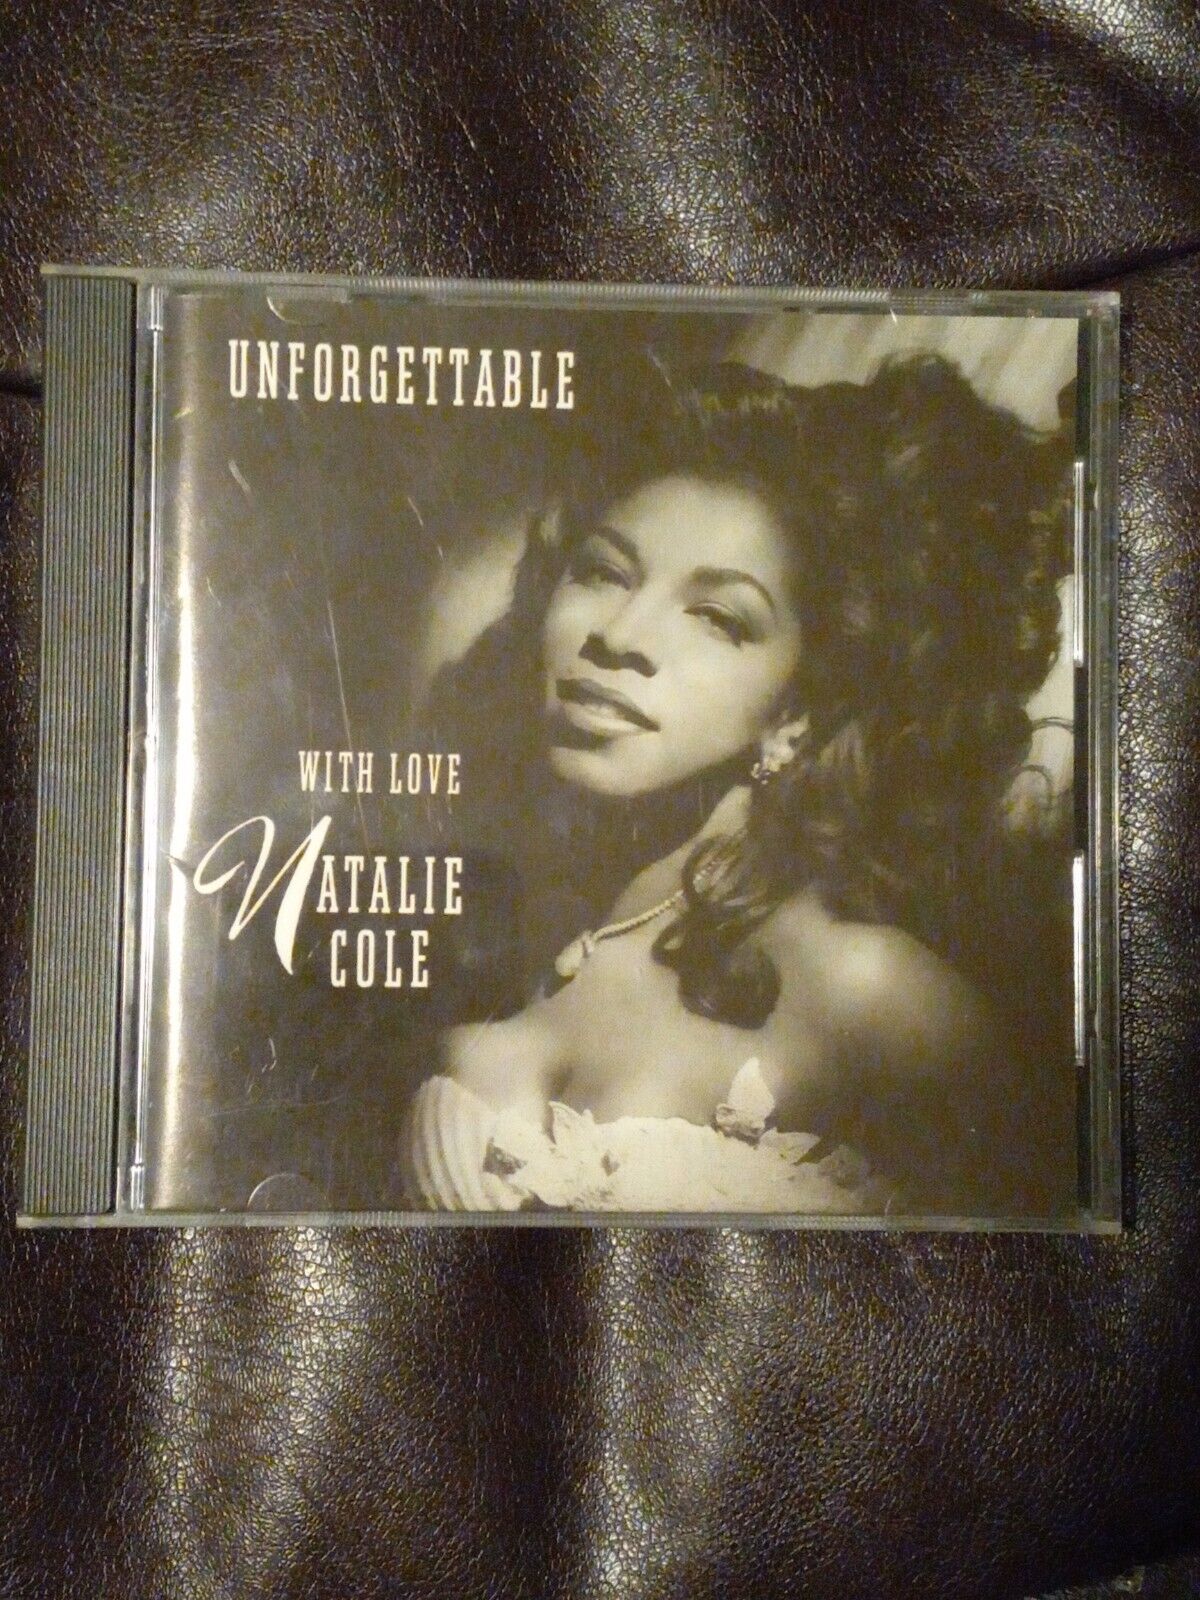 NATALIE COLE- UNFORGETTABLE WITH LOVE- 1991 CD COMPILATION ELEKTRA USA VOCAL